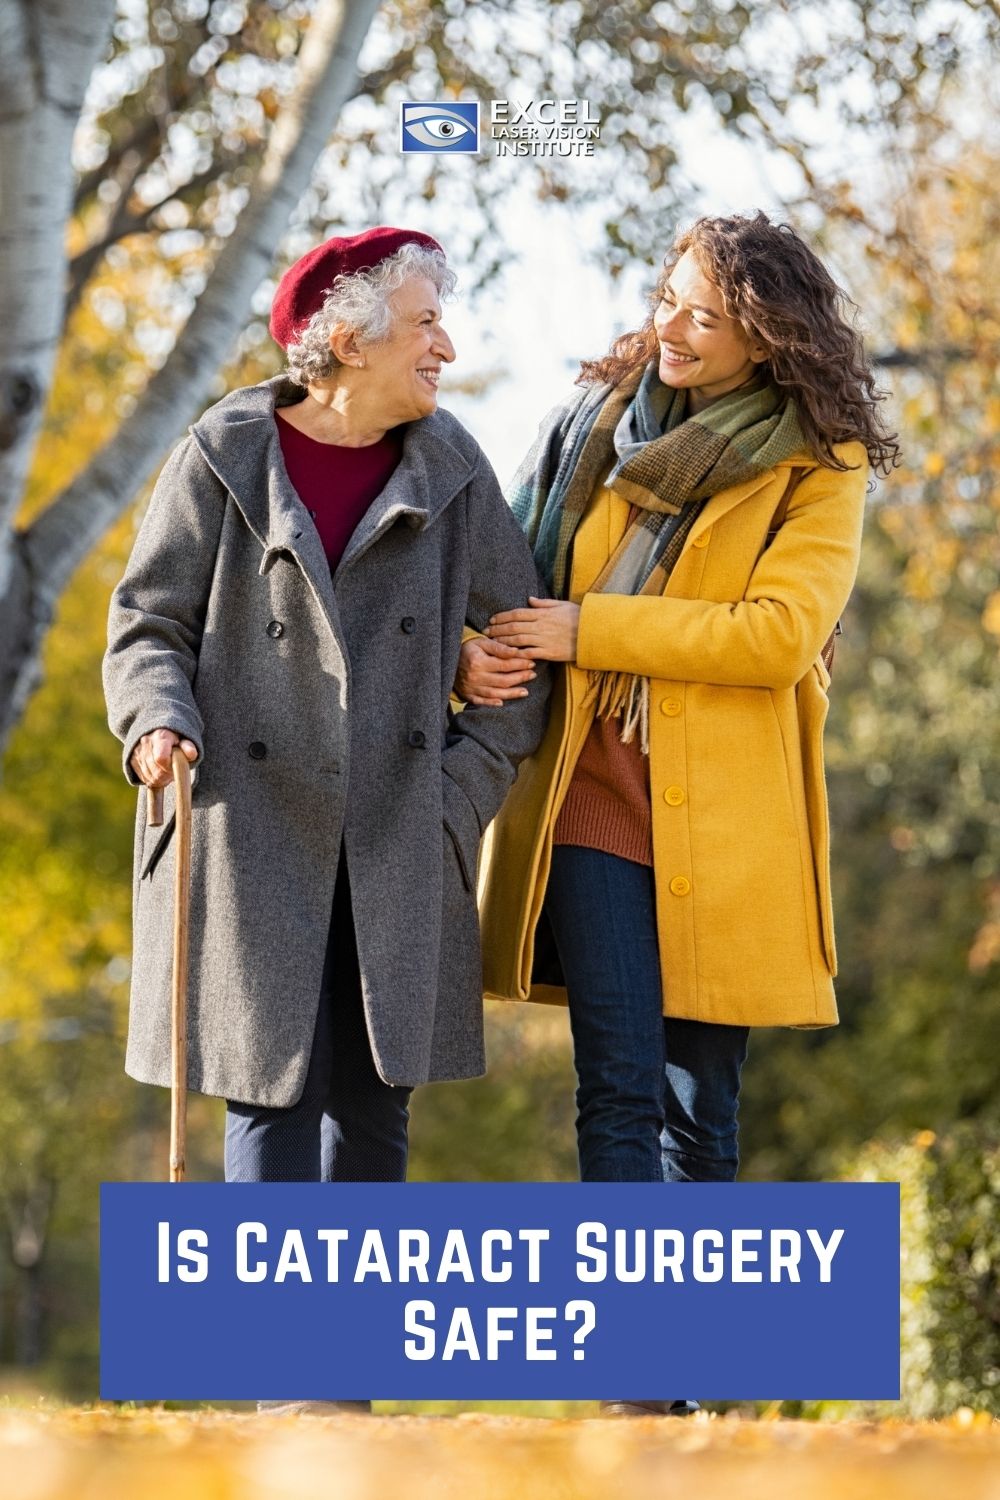 Get safe and effective cataract surgery in Los Angeles or Orange County